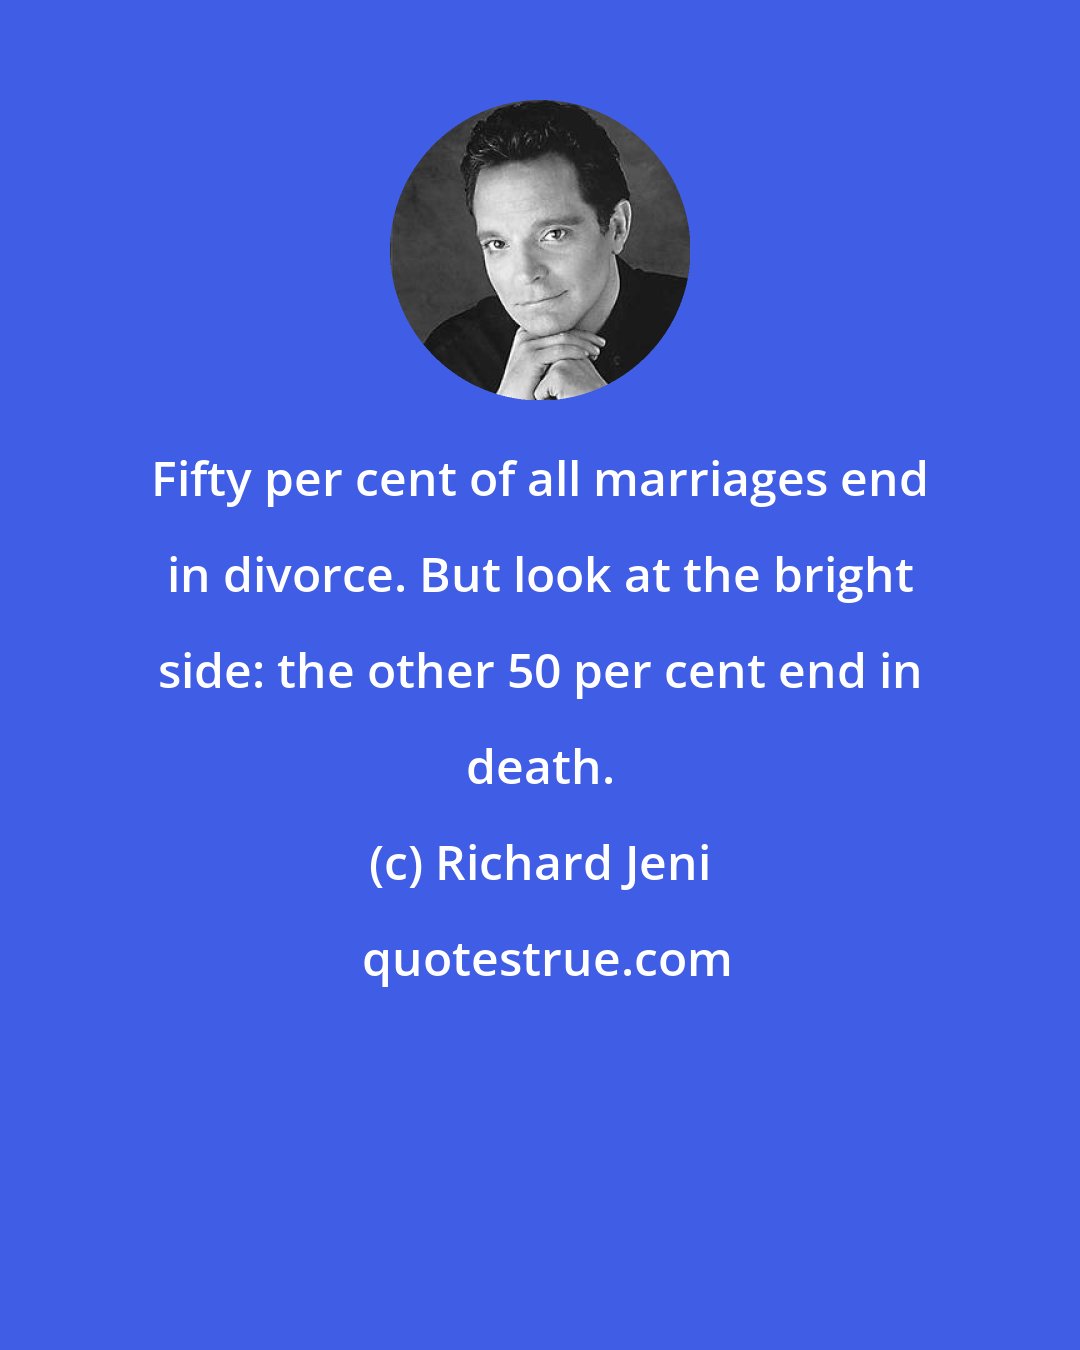 Richard Jeni: Fifty per cent of all marriages end in divorce. But look at the bright side: the other 50 per cent end in death.